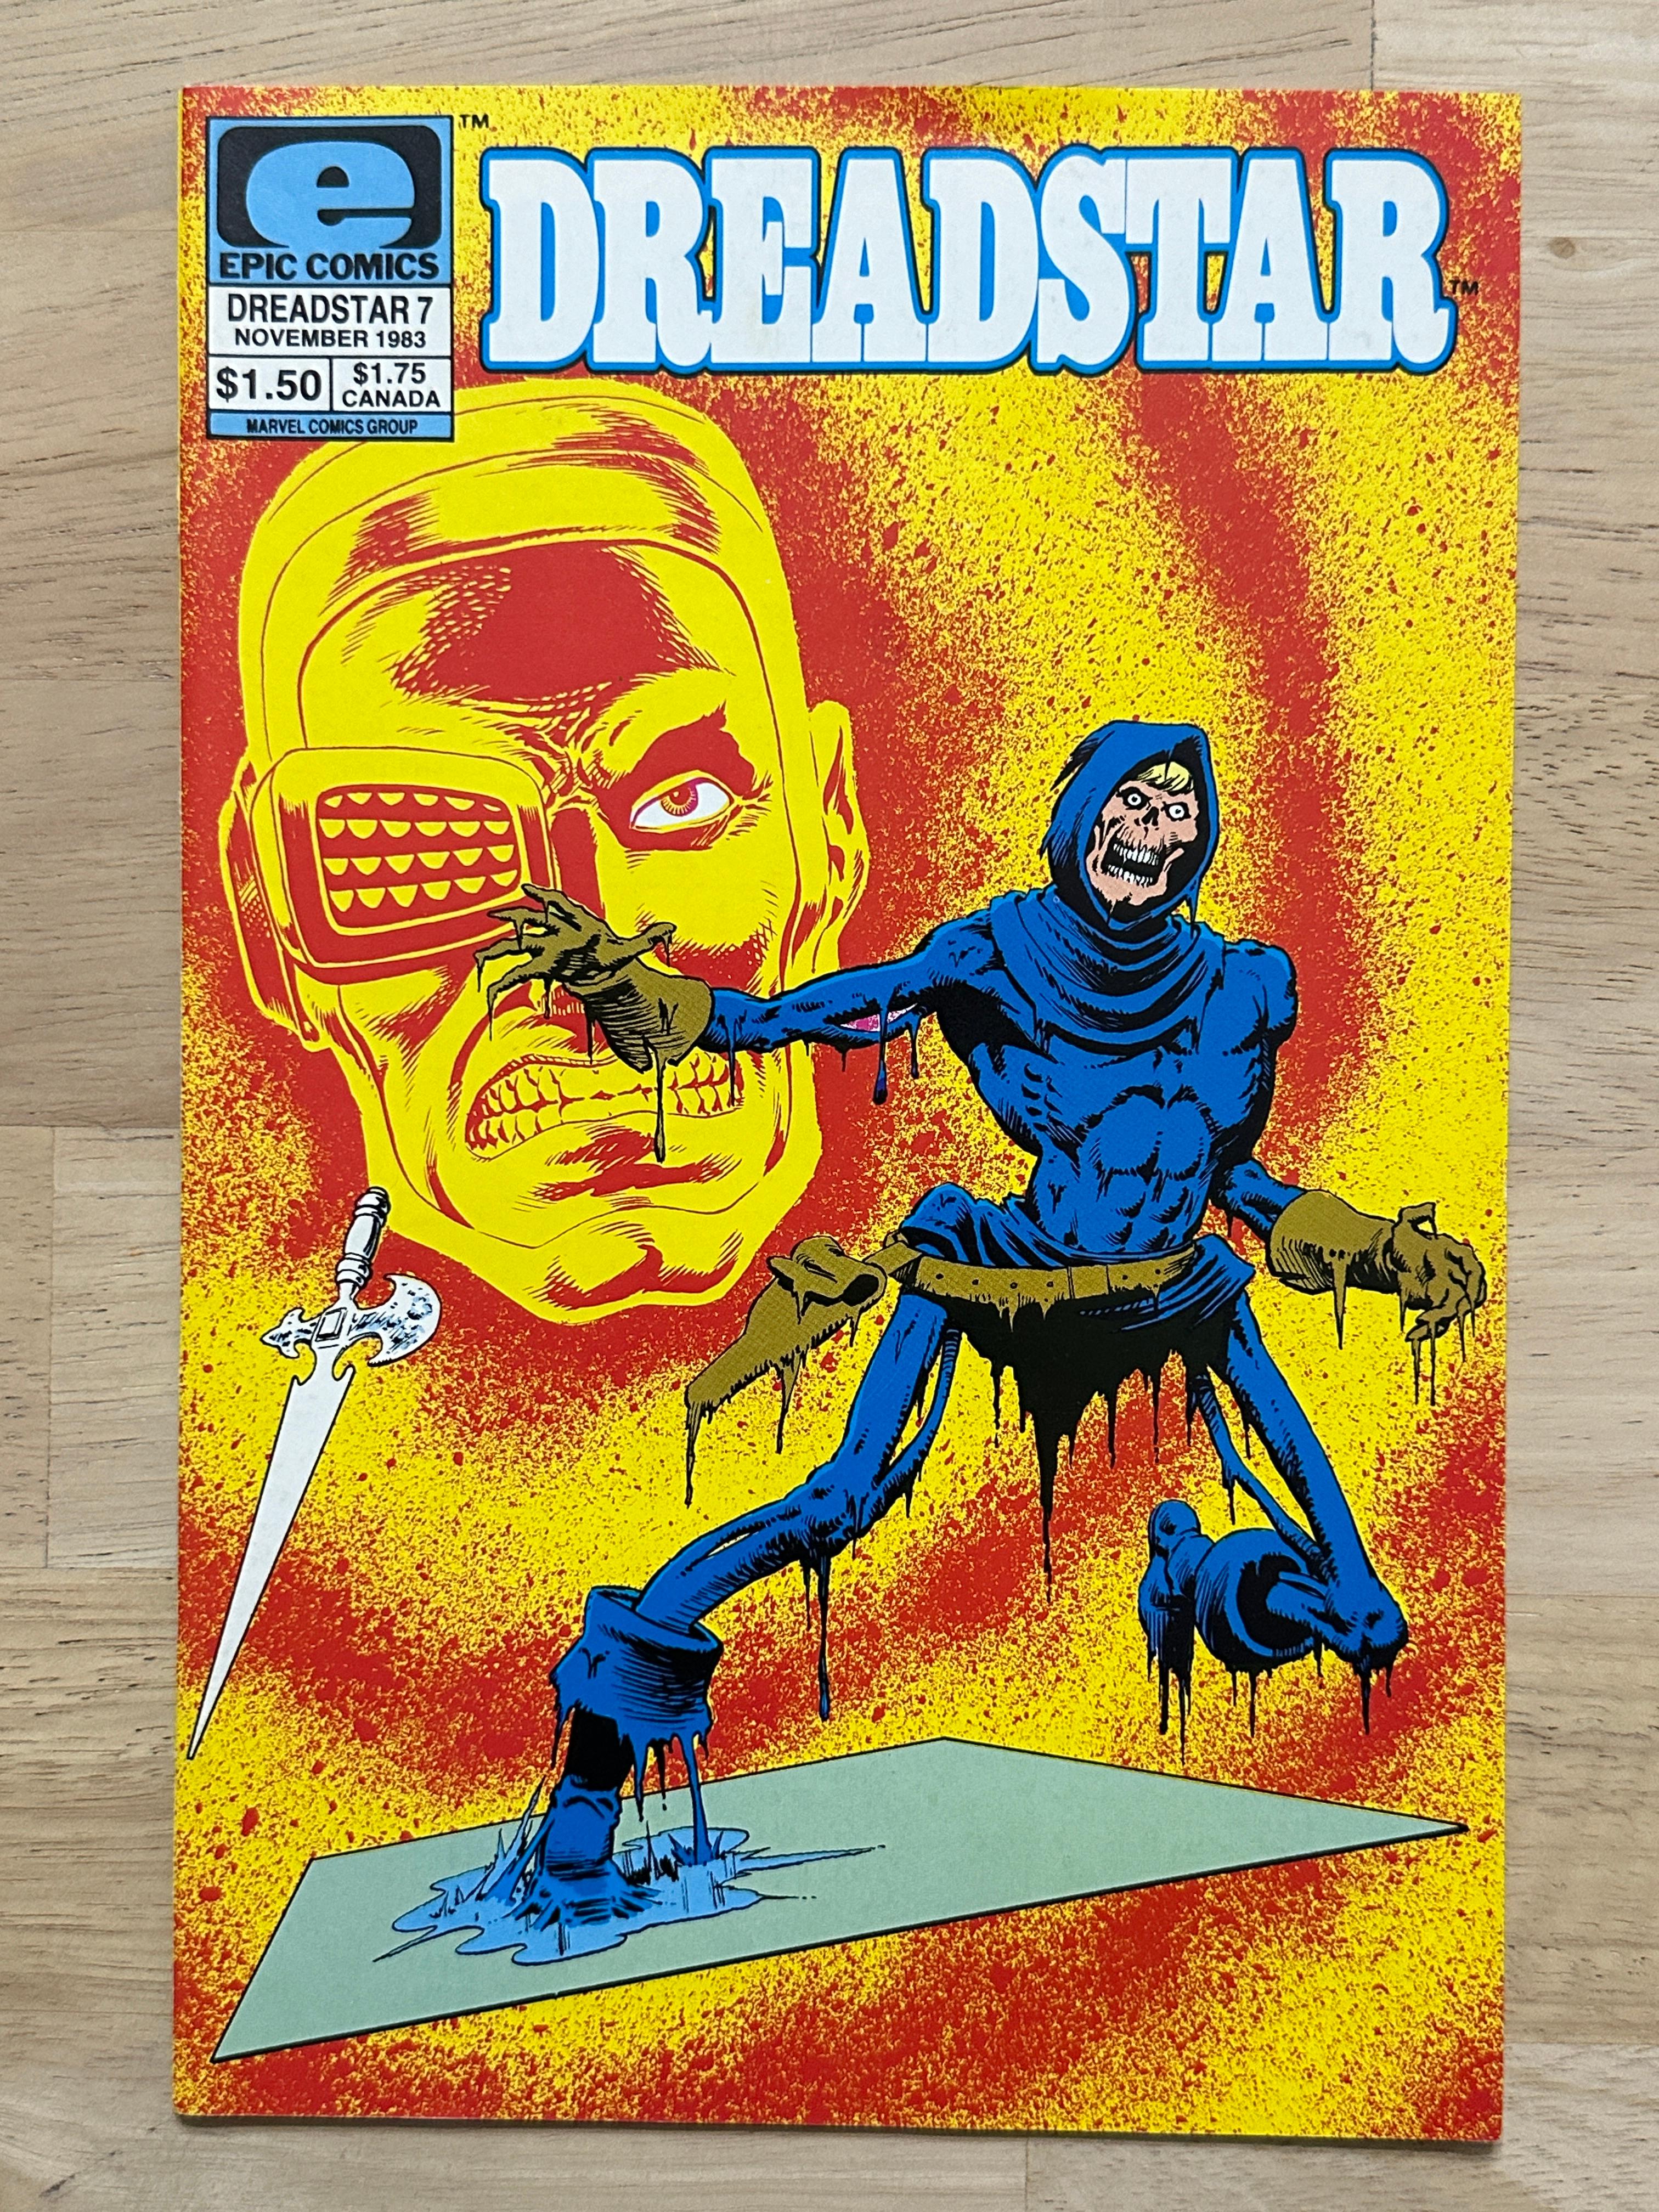 (10) Vintage Collection of Dreadstar Comics Issues 1-10